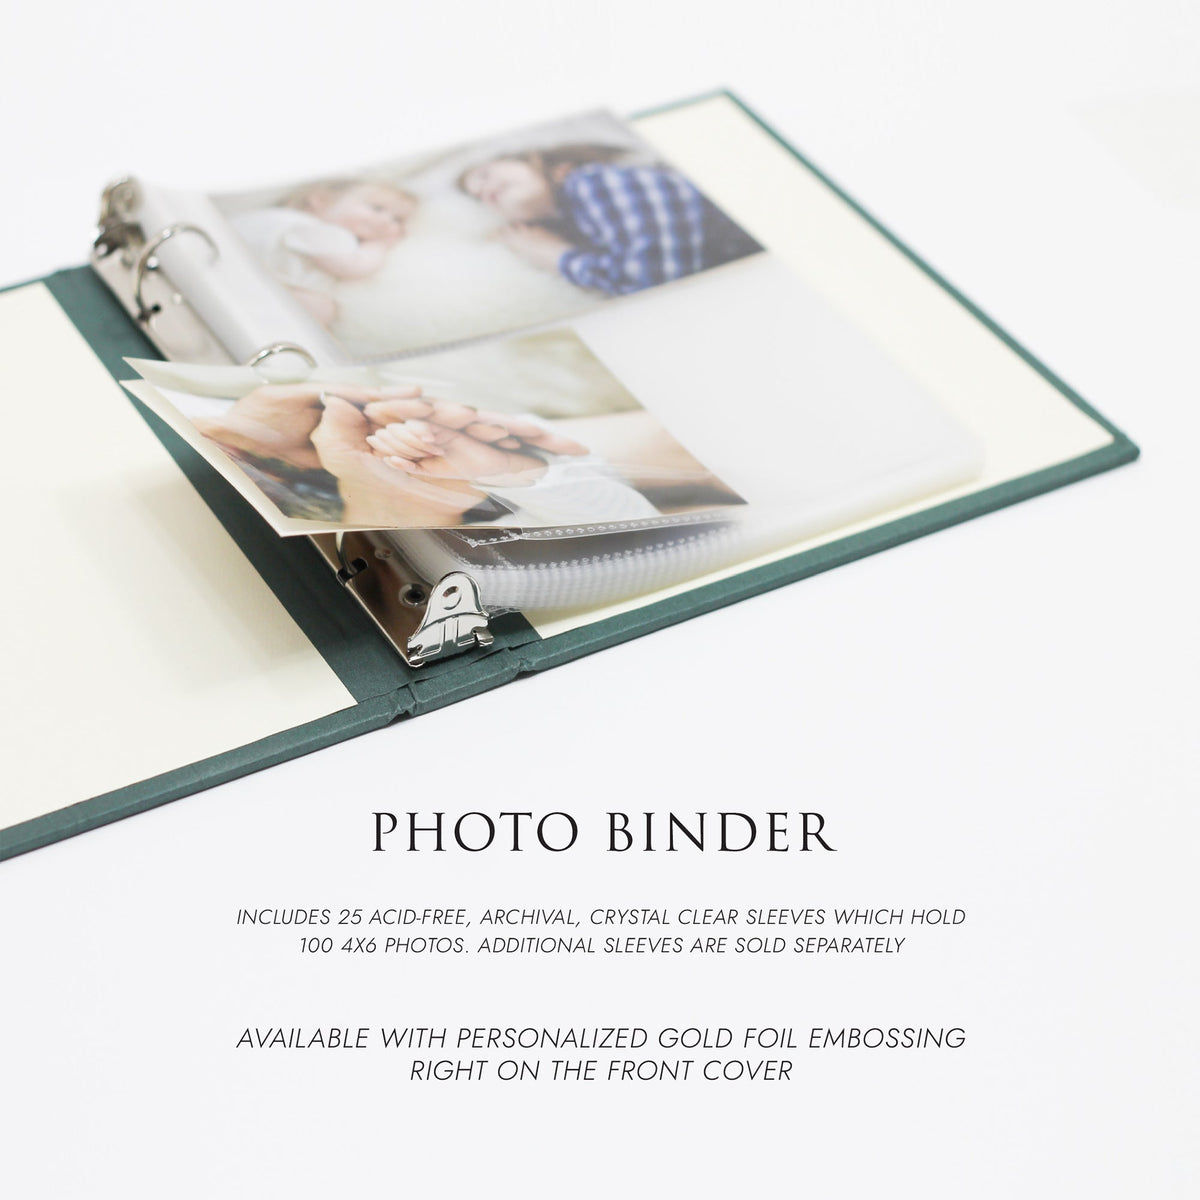 Medium Photo Binder | for 4 x 6 photos | with Retro Floral Cover